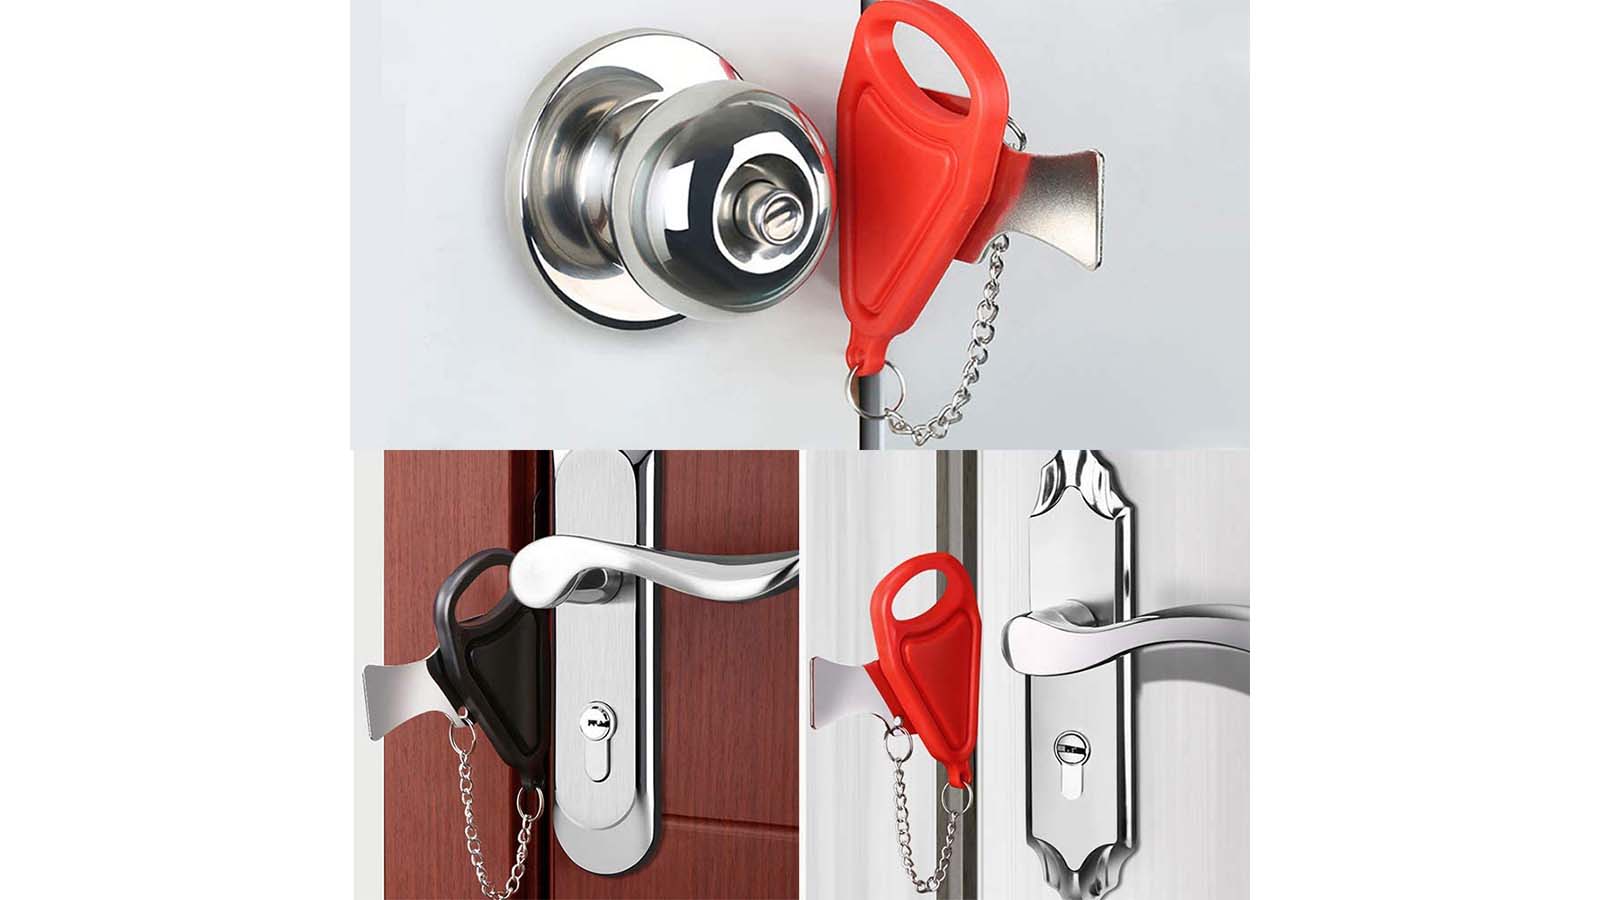 2023 New Portable Door Lock Security for Travel Home Hotel Apartment Must  Haves Heavy Duty Door Locker for Additional Safety and Peace of